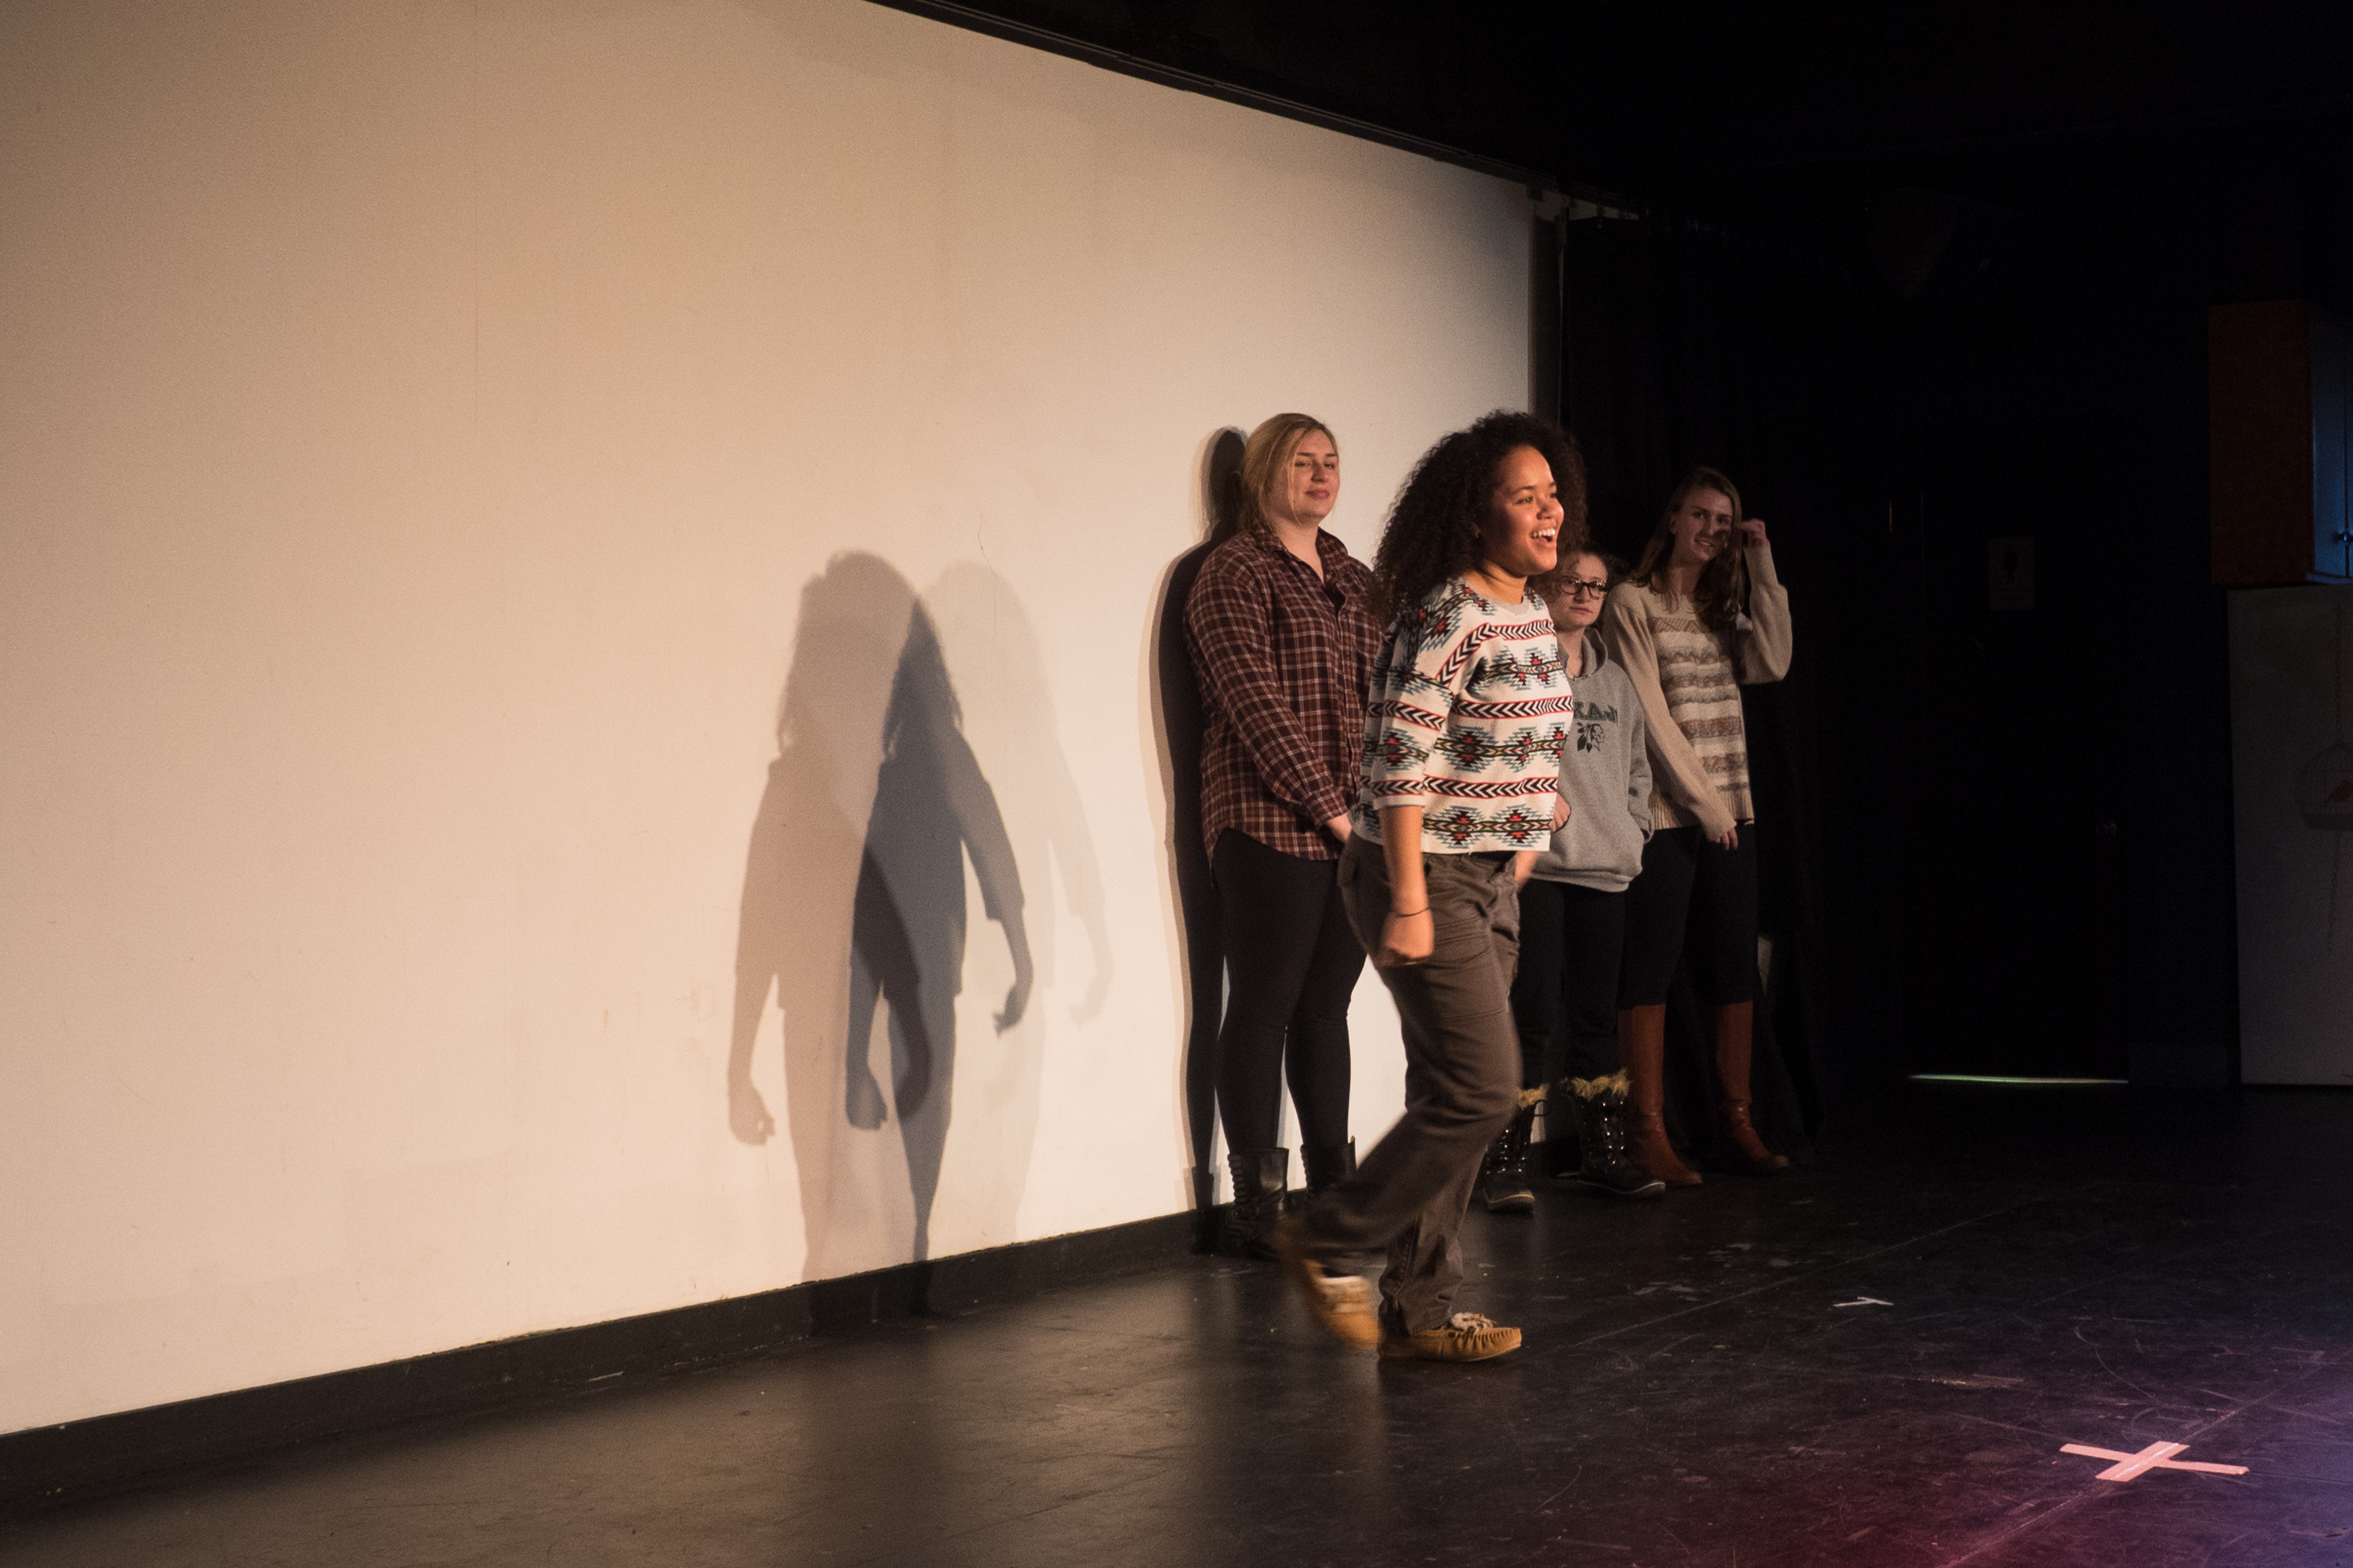 The cast of this year’s production of Eve Ensler’s The Vagina Monologues rehearsed and performed in the Other Room Theater. Cecilia Plaza ’17 directed the production for the second year in a row. Photo by Emma Brown '17